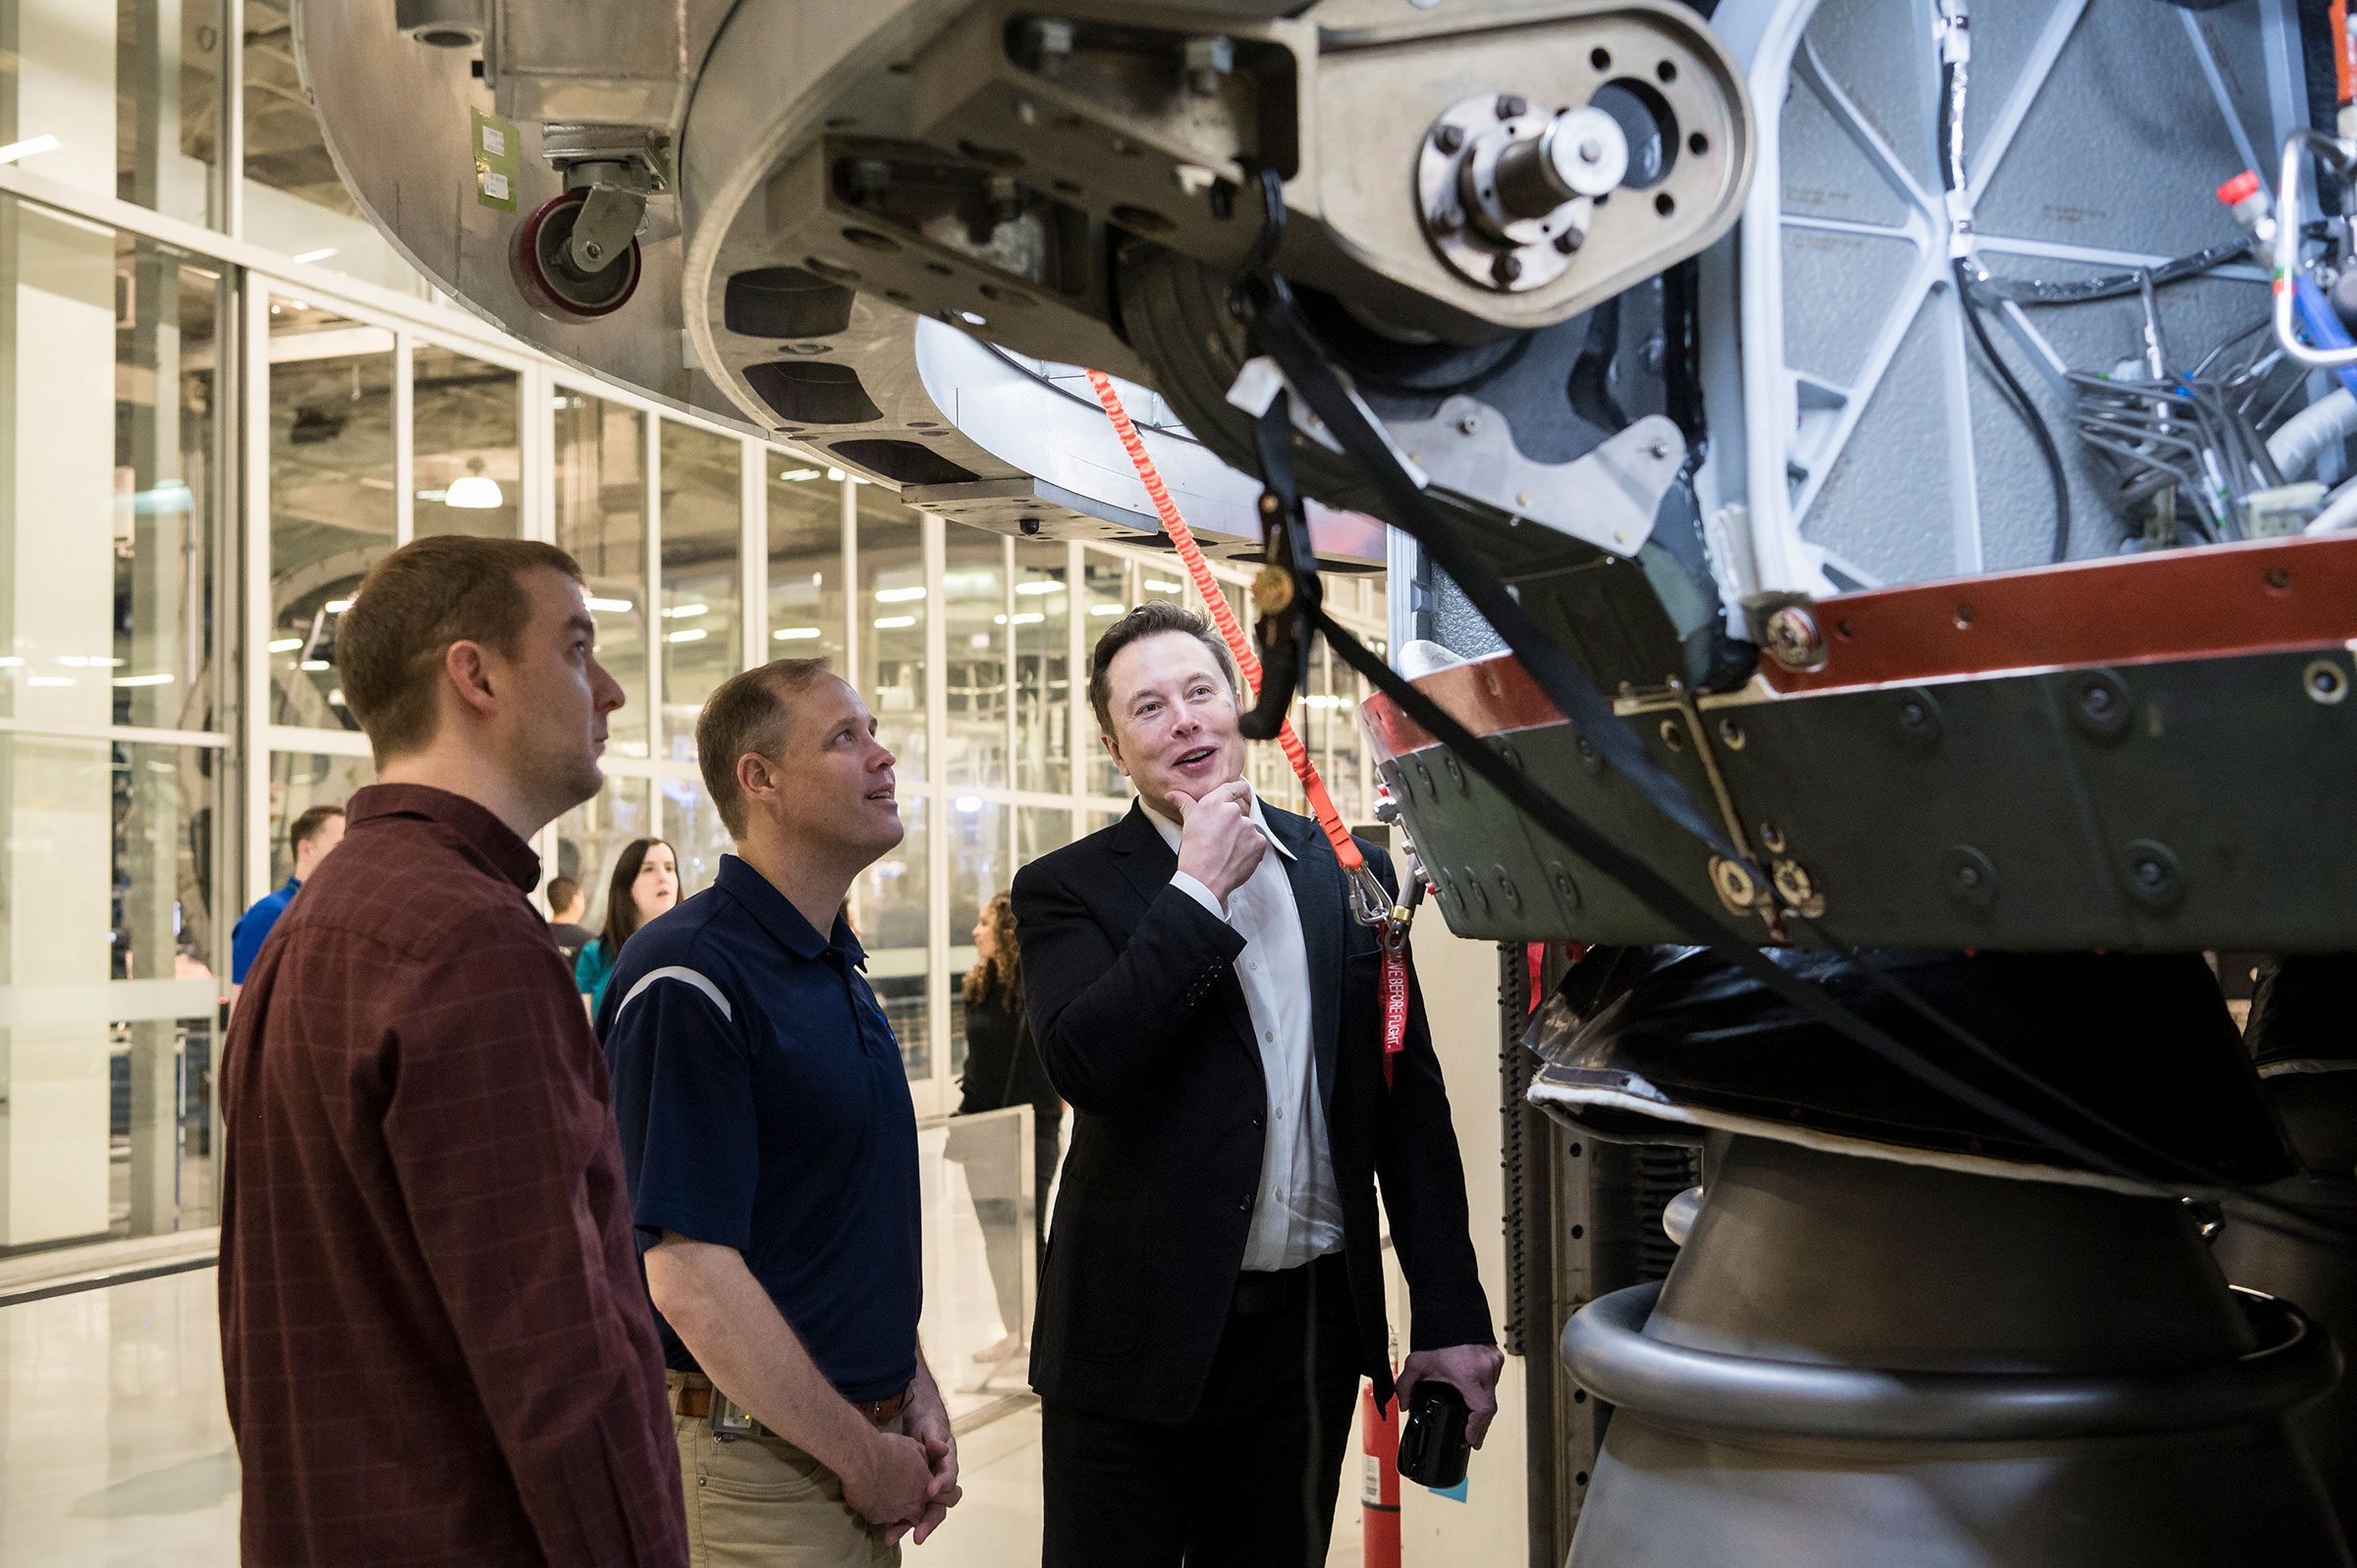 SpaceX Chief Engineer Elon Musk speaks with NASA Administrator Jim Bridenstine while viewing the OctaWeb, part of the Merlin engine used for the Falcon rockets, at the SpaceX Headquarters, in Hawthorne, Calif. on Oct. 10, 2019.